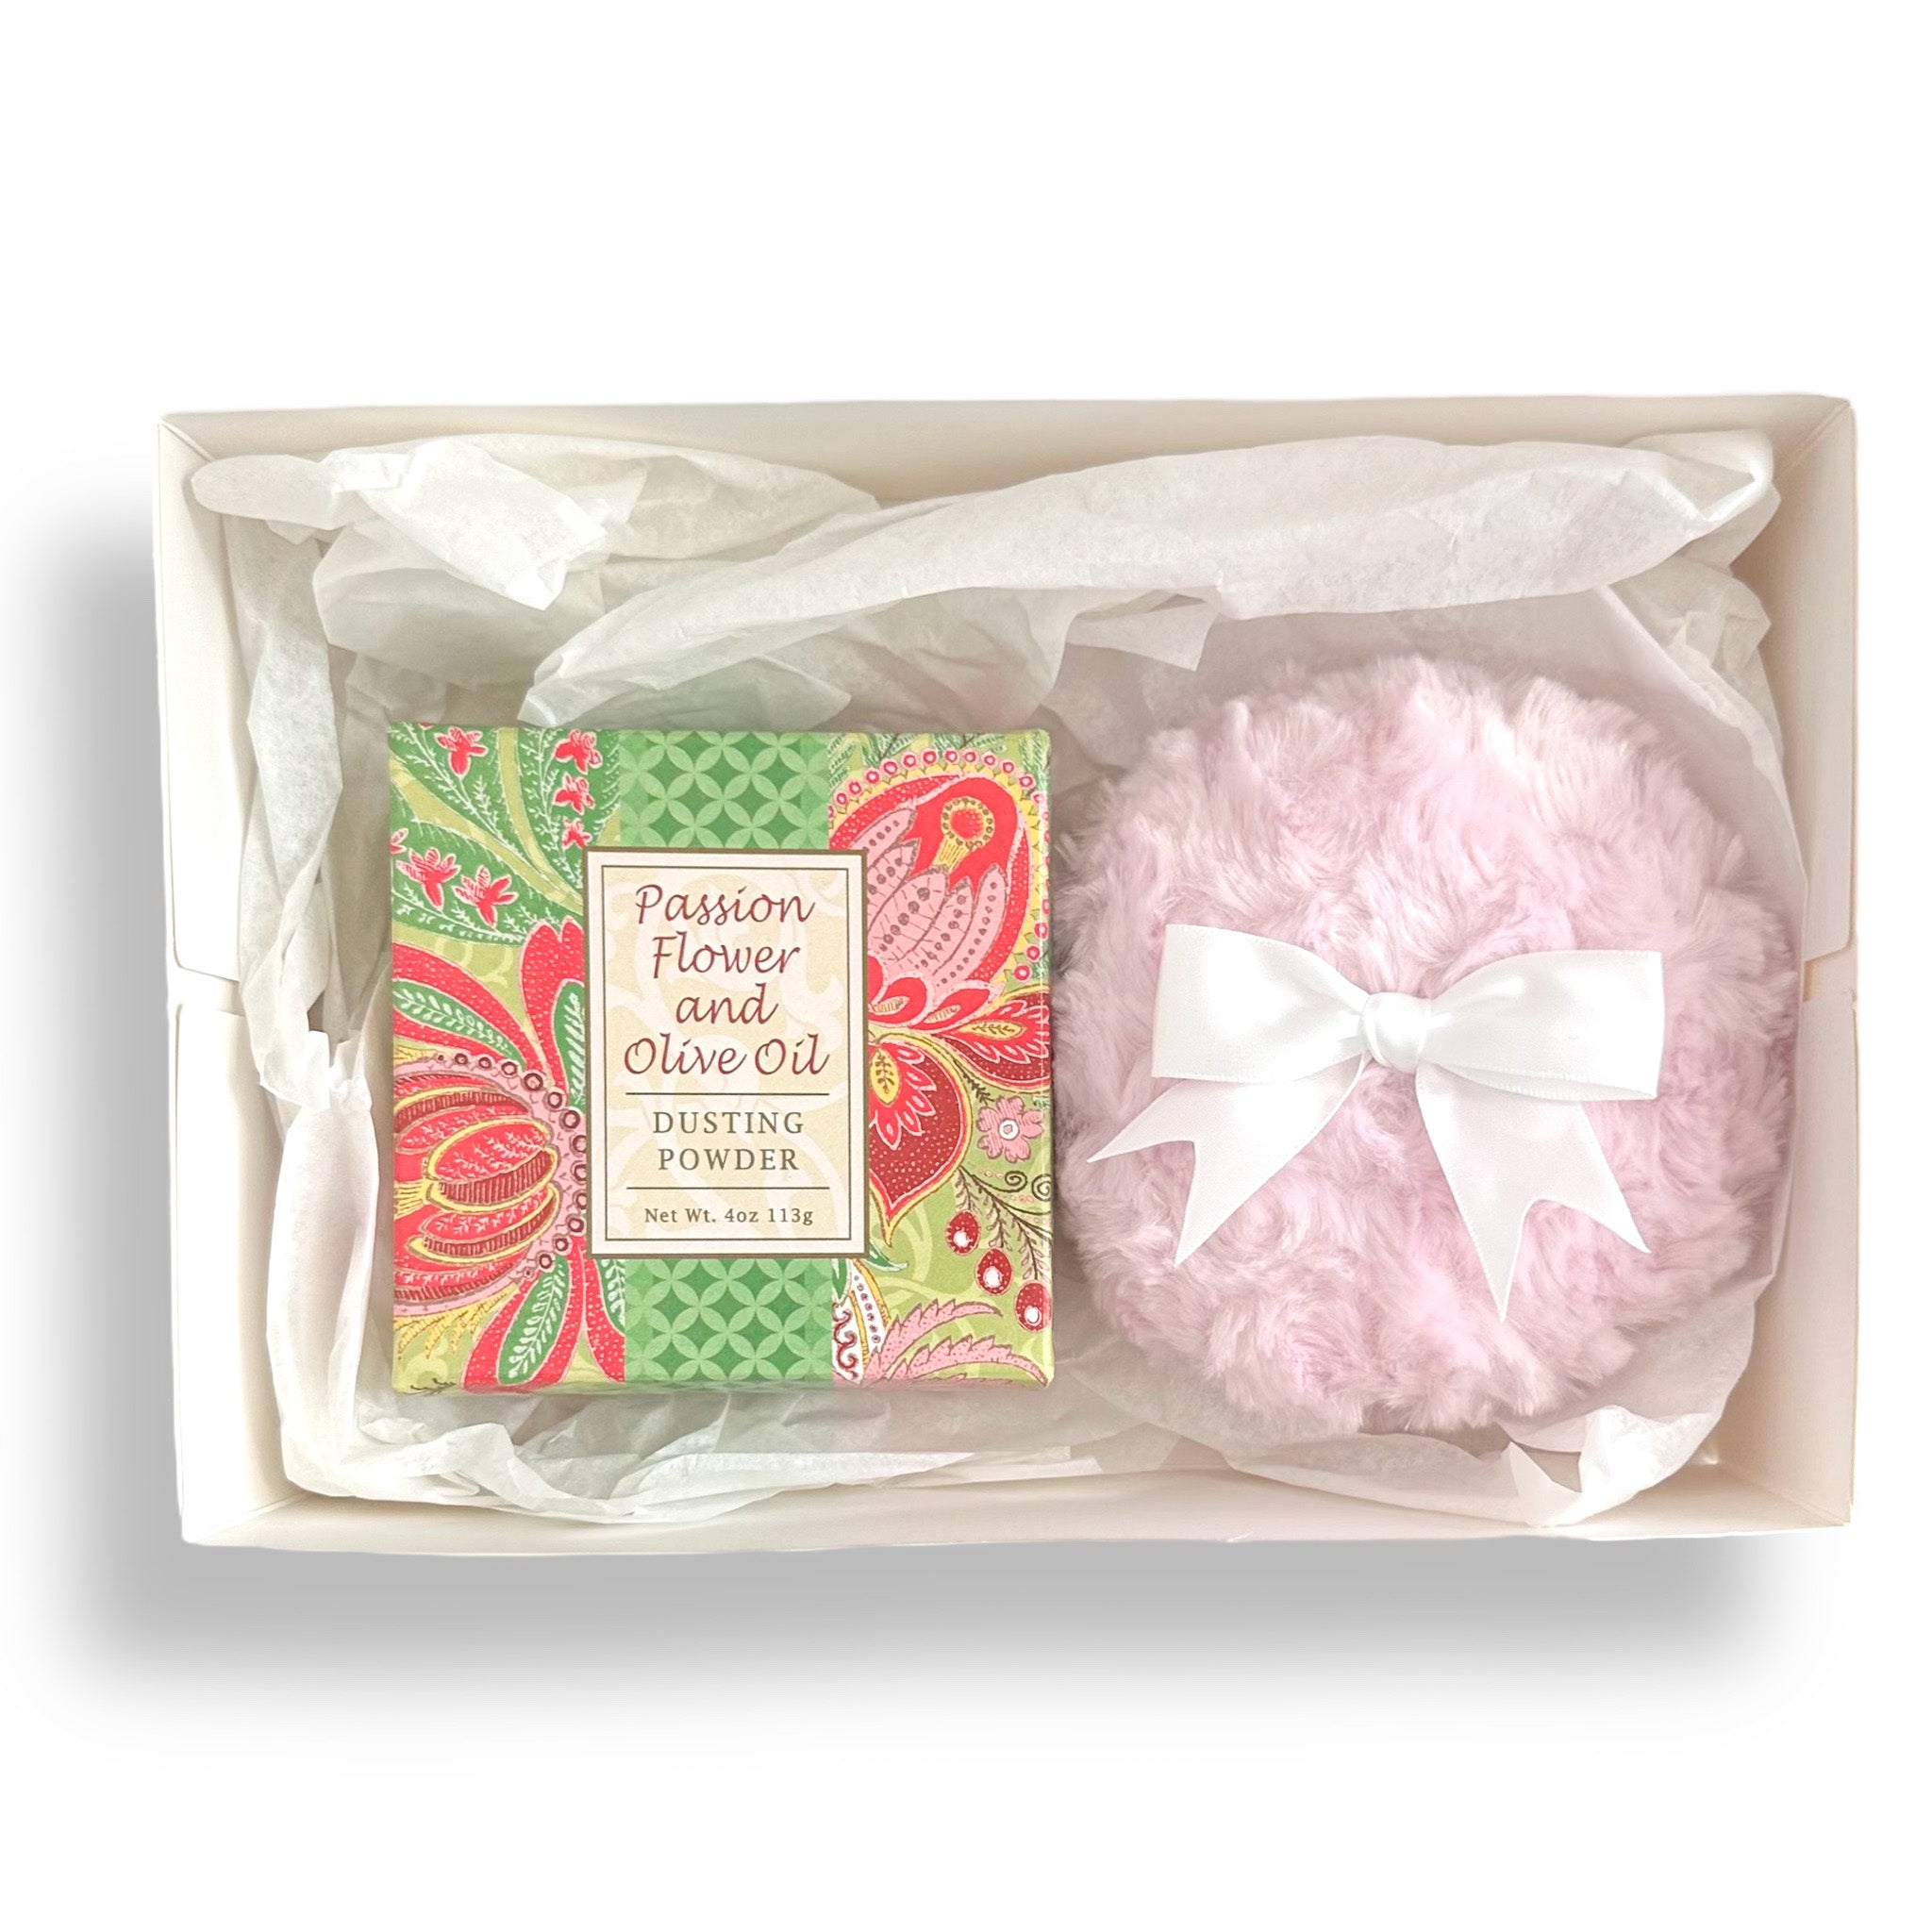 Dusting Powder & Puff GIFT SET - Greenwich Bay Trading Company + Luxe Puffs - Passionflower